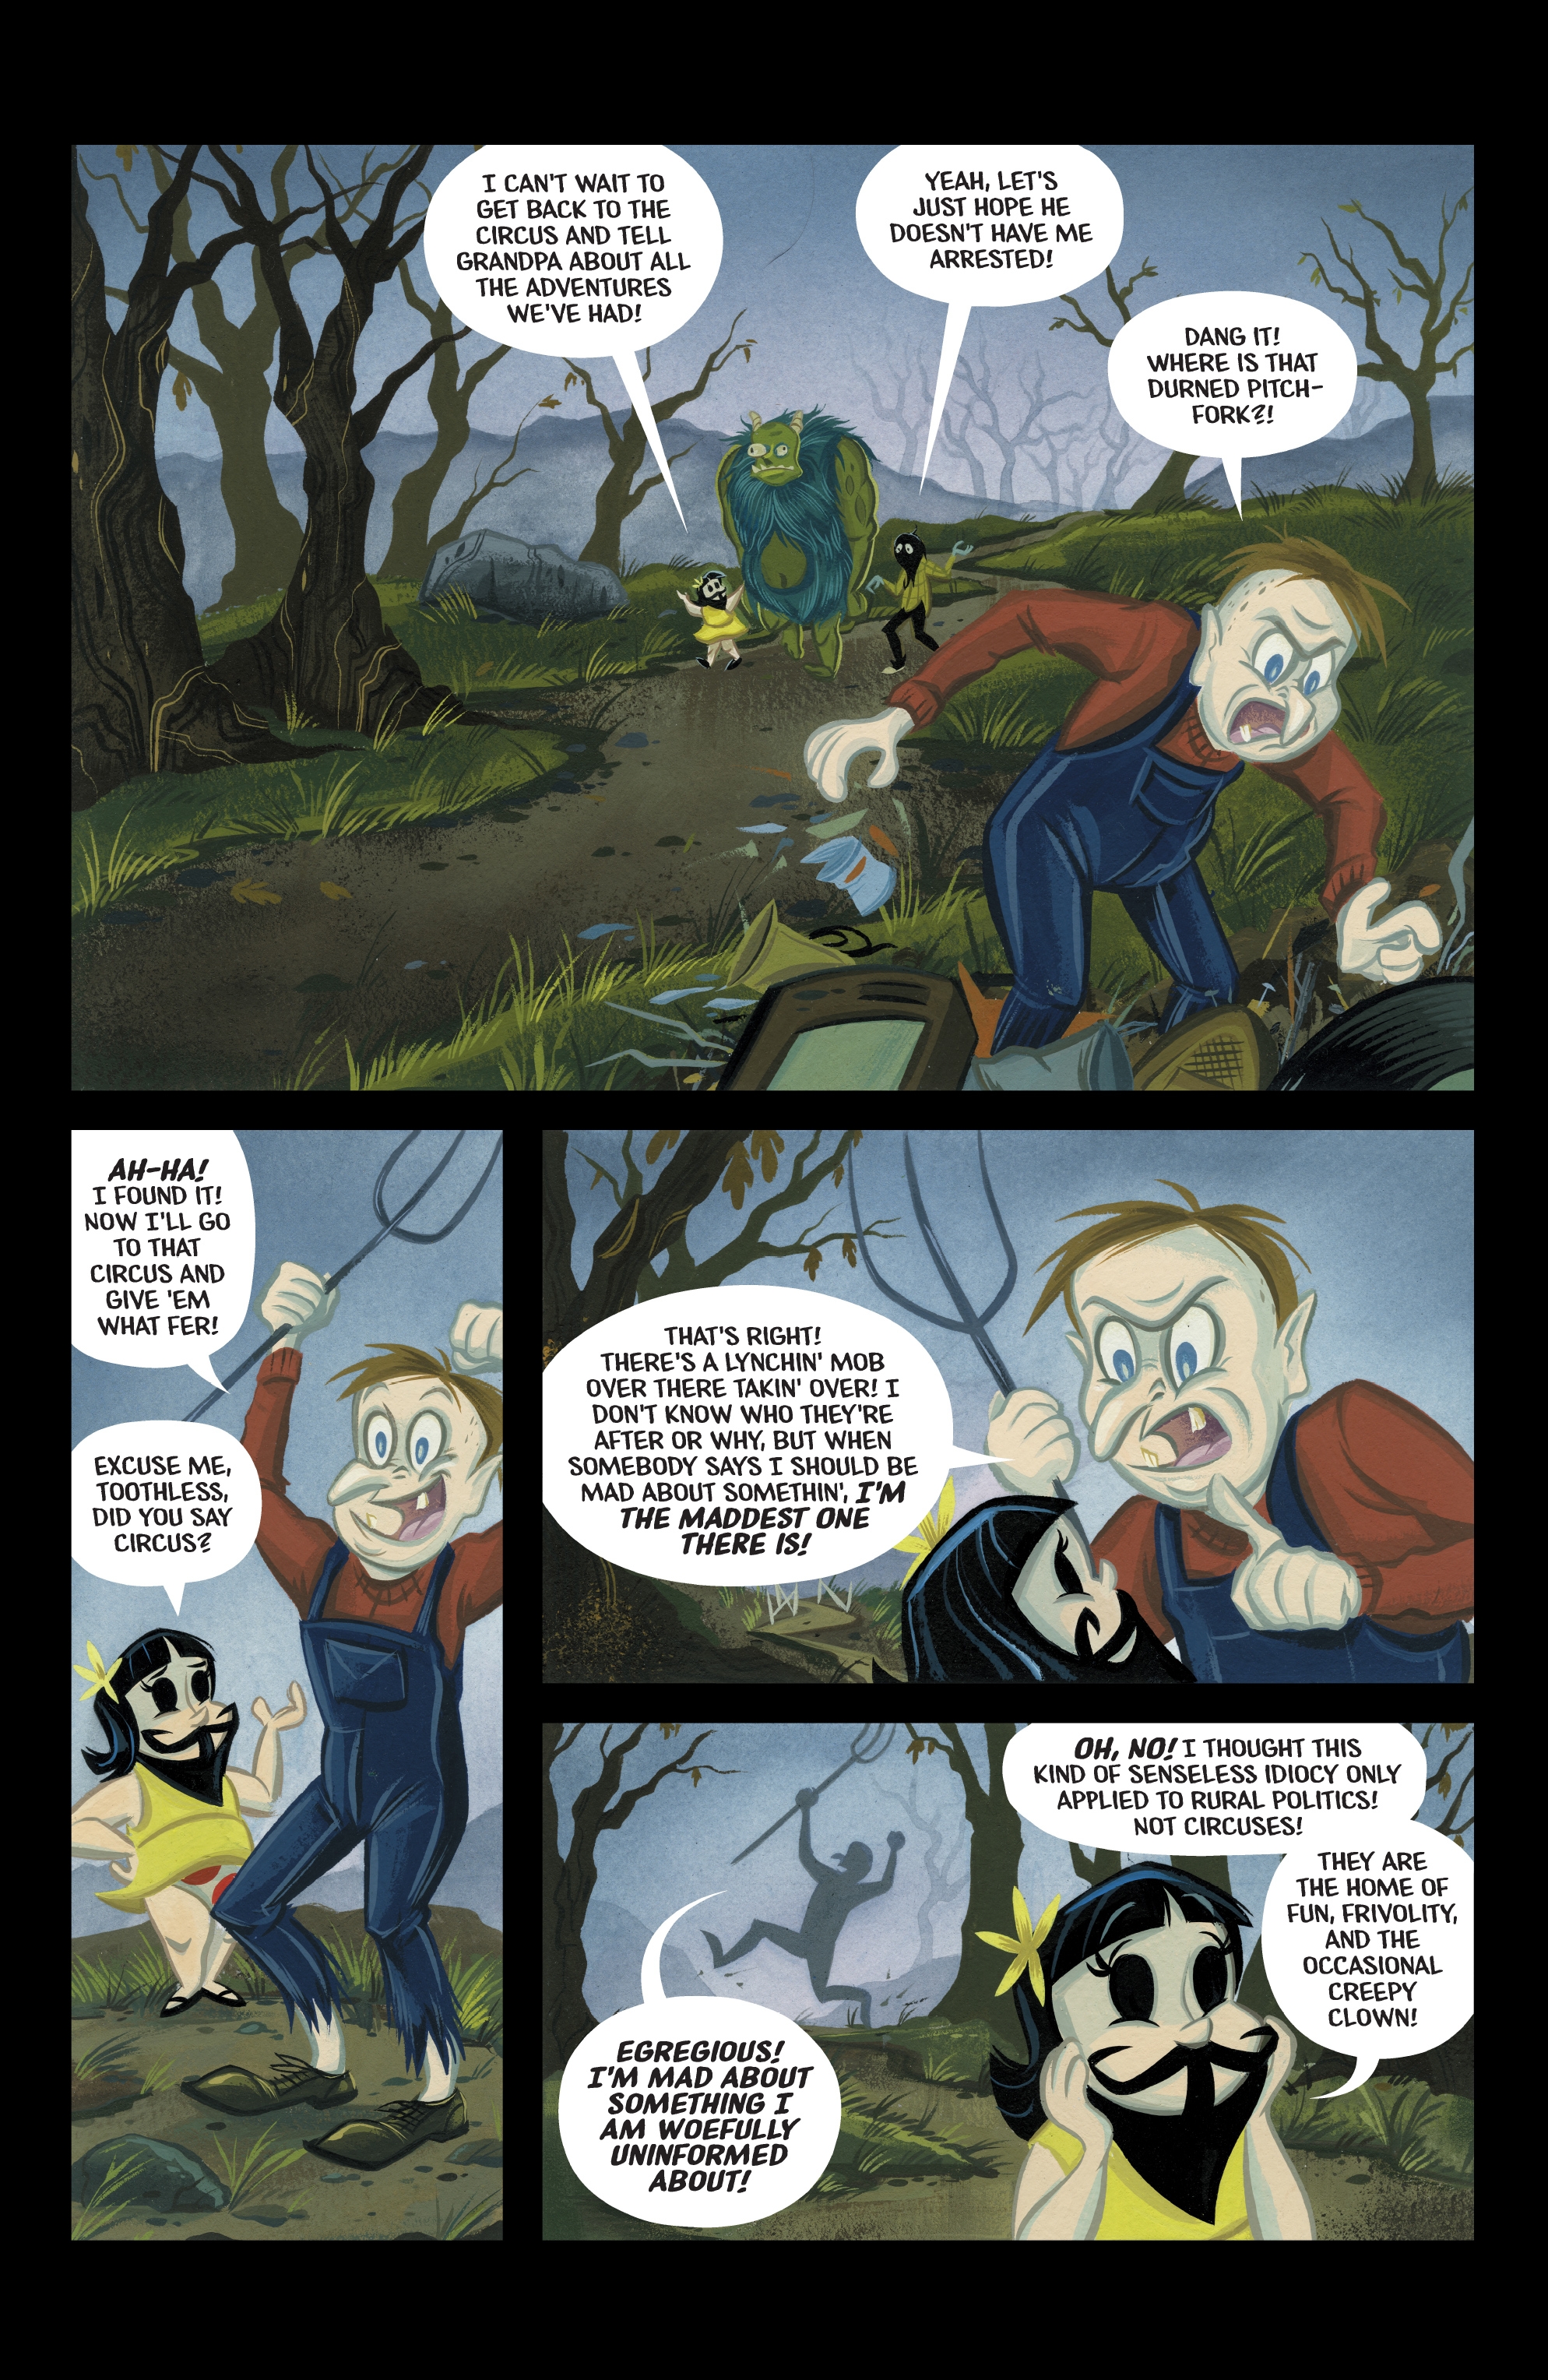 Chimichanga - The Sorrow of the World's Worst Face!: Chapter 4 - Page 3